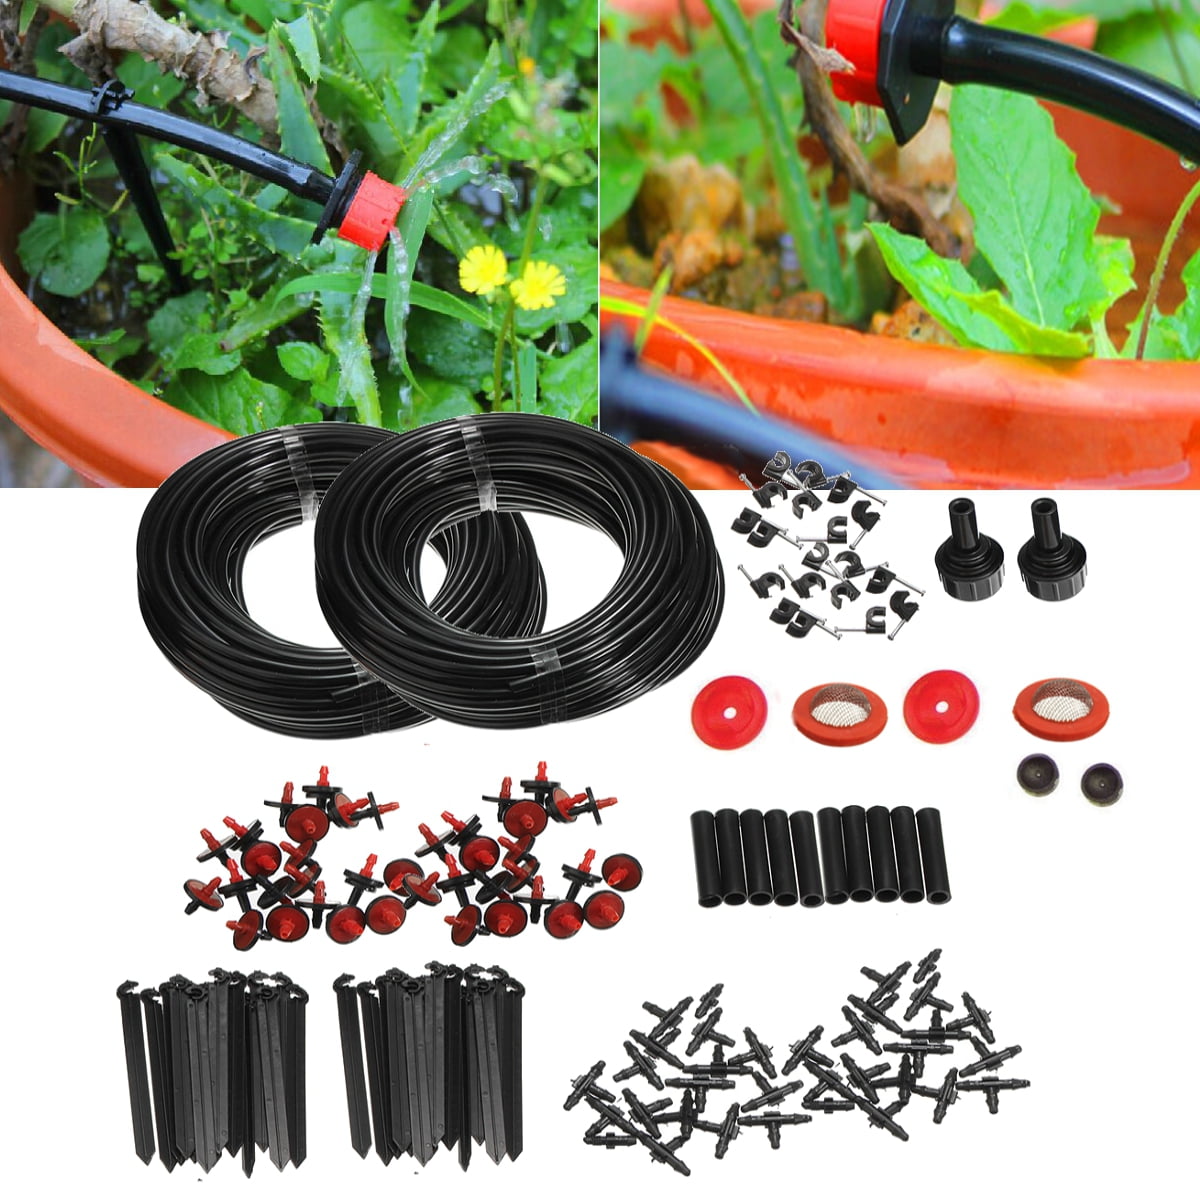 Automatic DIY Micro Drip Irrigation System Water Pump Plant Watering Garden Hose